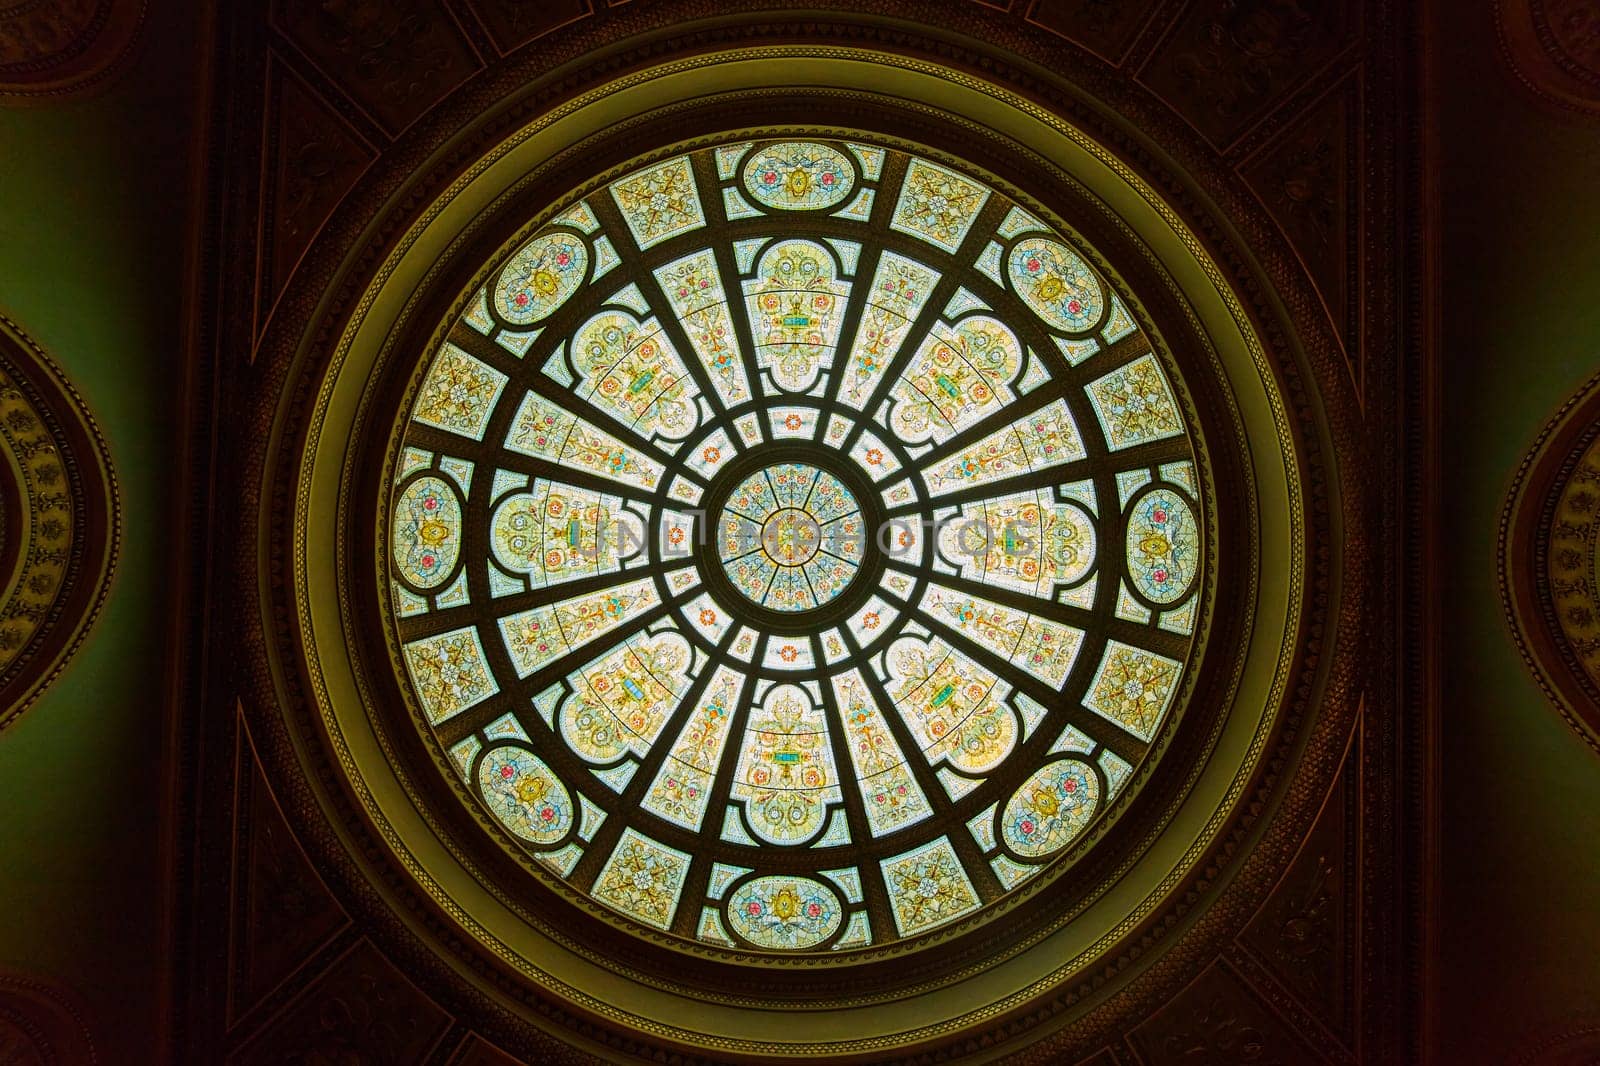 Ornate dome ceiling with Celtic stained glass décor design, green and gold, colorful, Tiffany Dome by njproductions